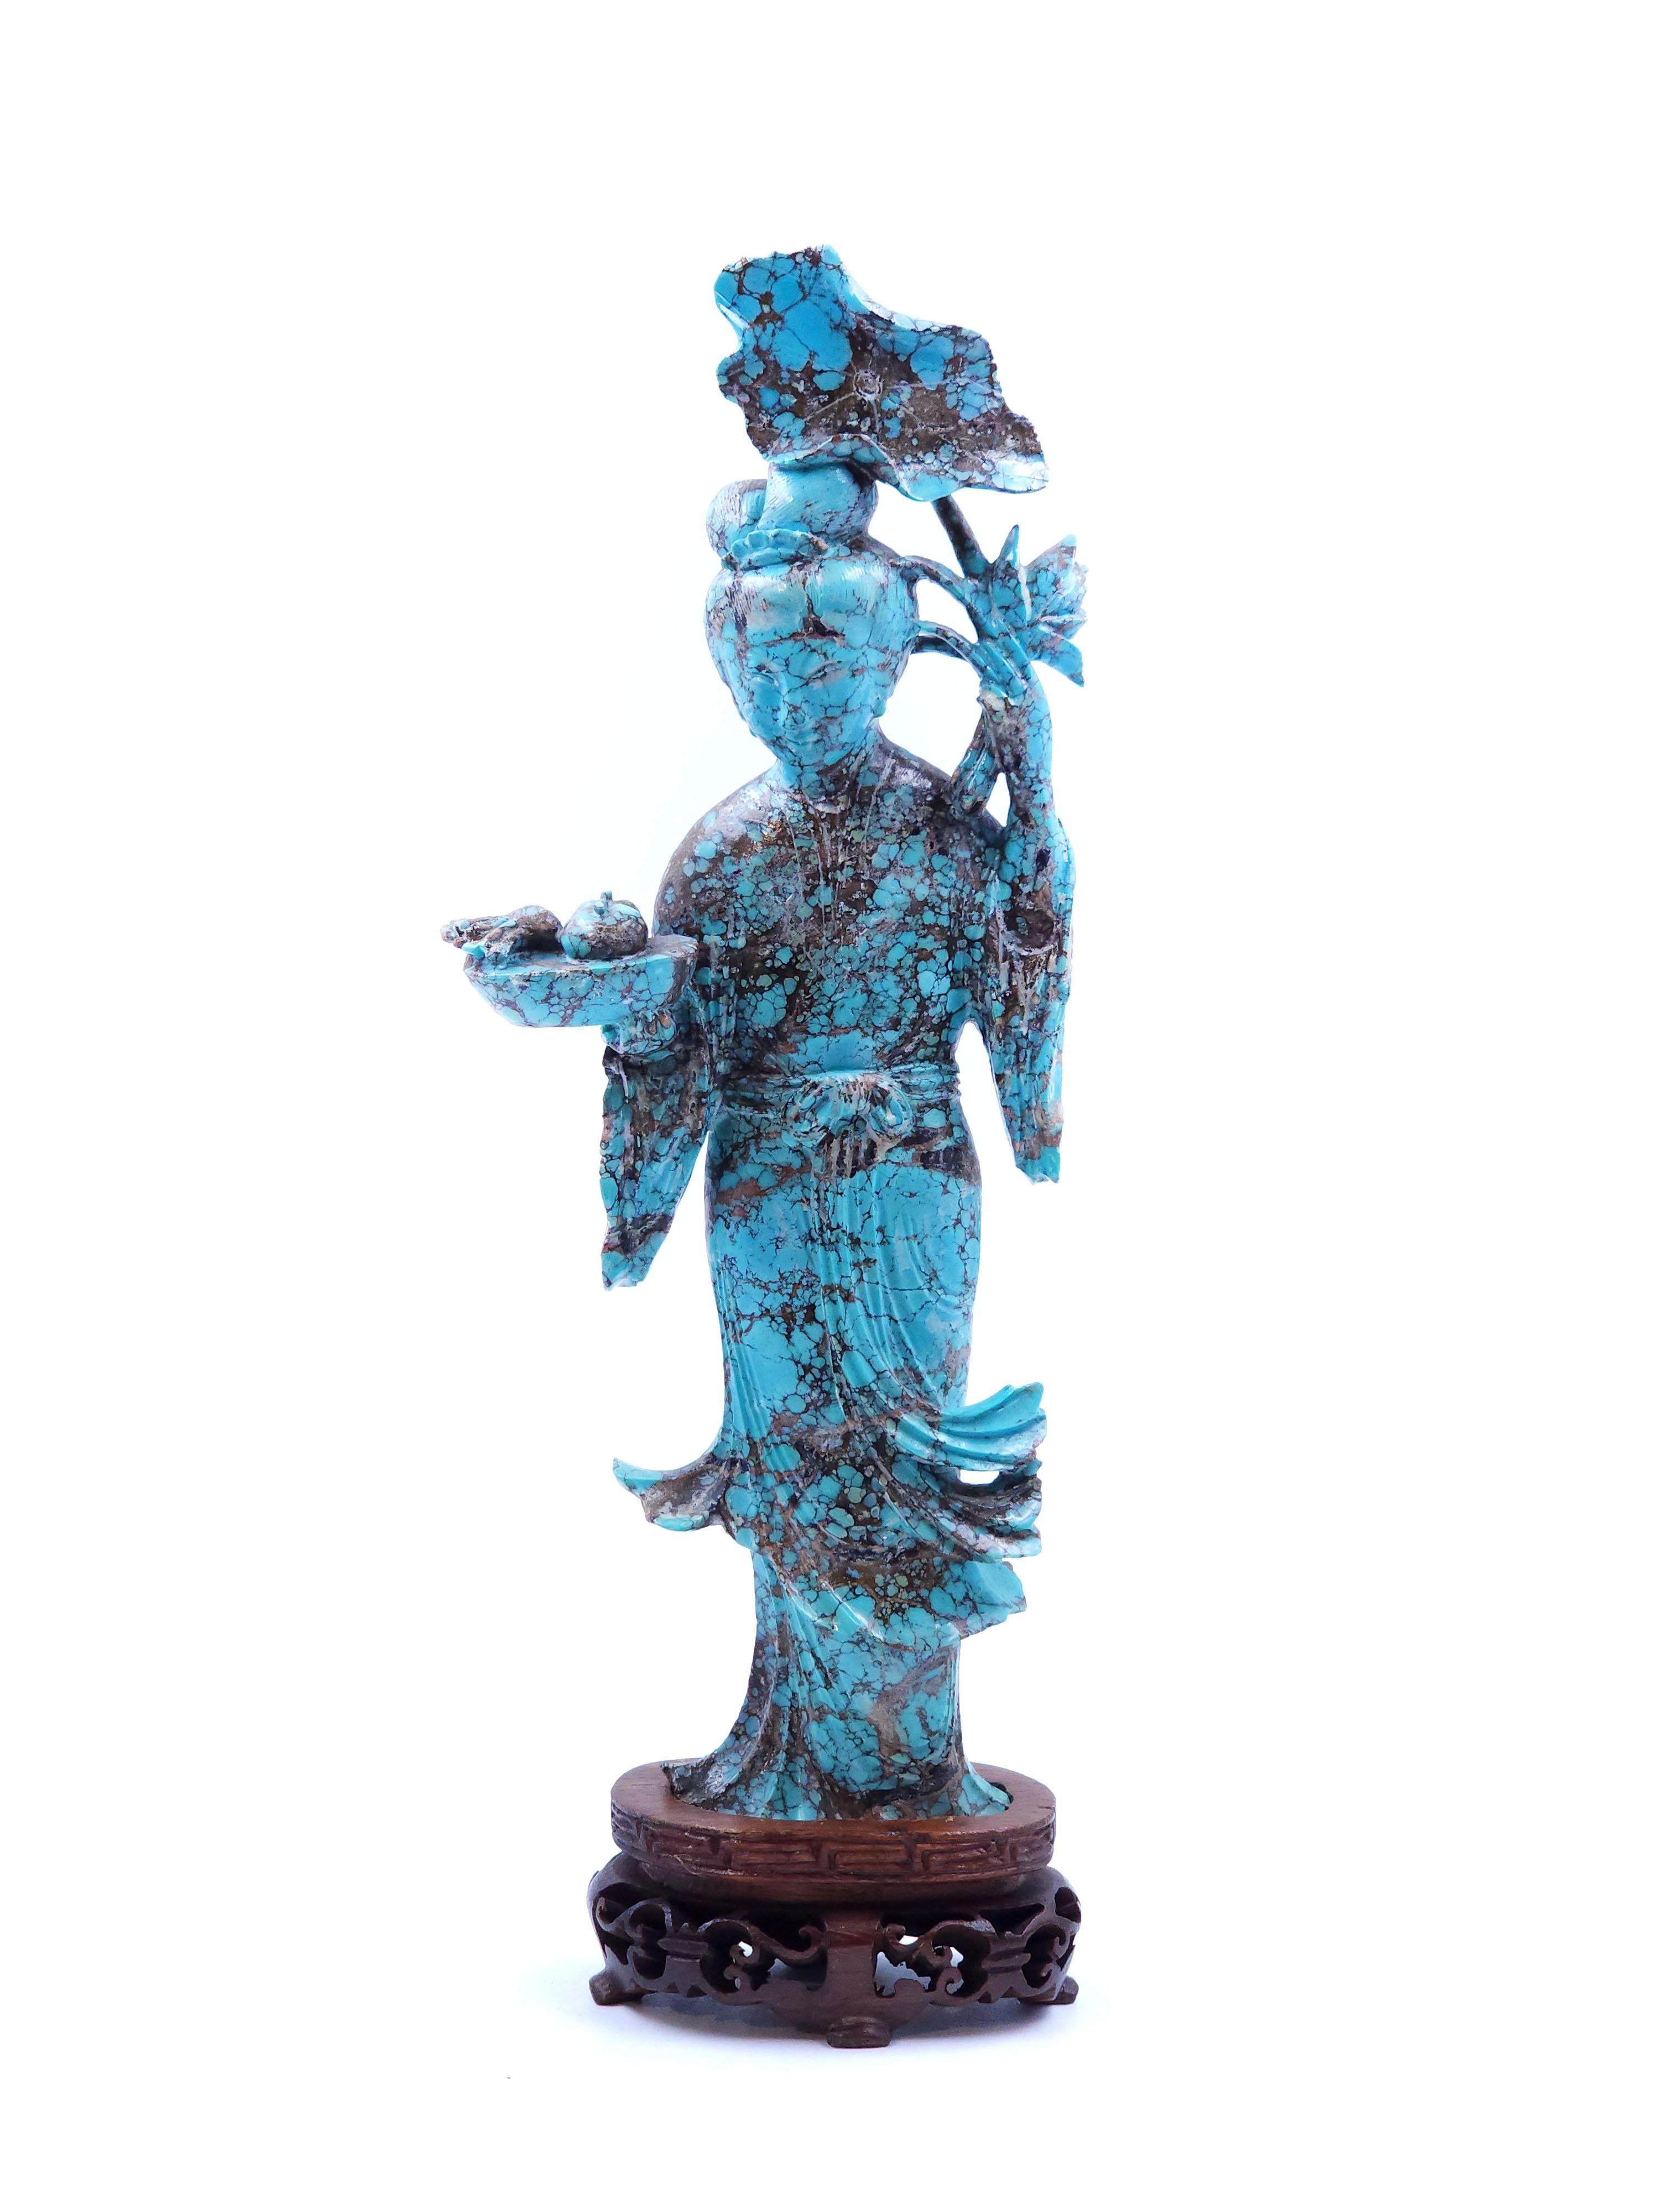 Qing Dynasty oriental lady standing in carved turquoise
Elegant figure of a woman carved in turquoise stone, with traditional Chinese clothes and in one hand she holds a basket of fruits and with the other flowers. The base also consists of a design